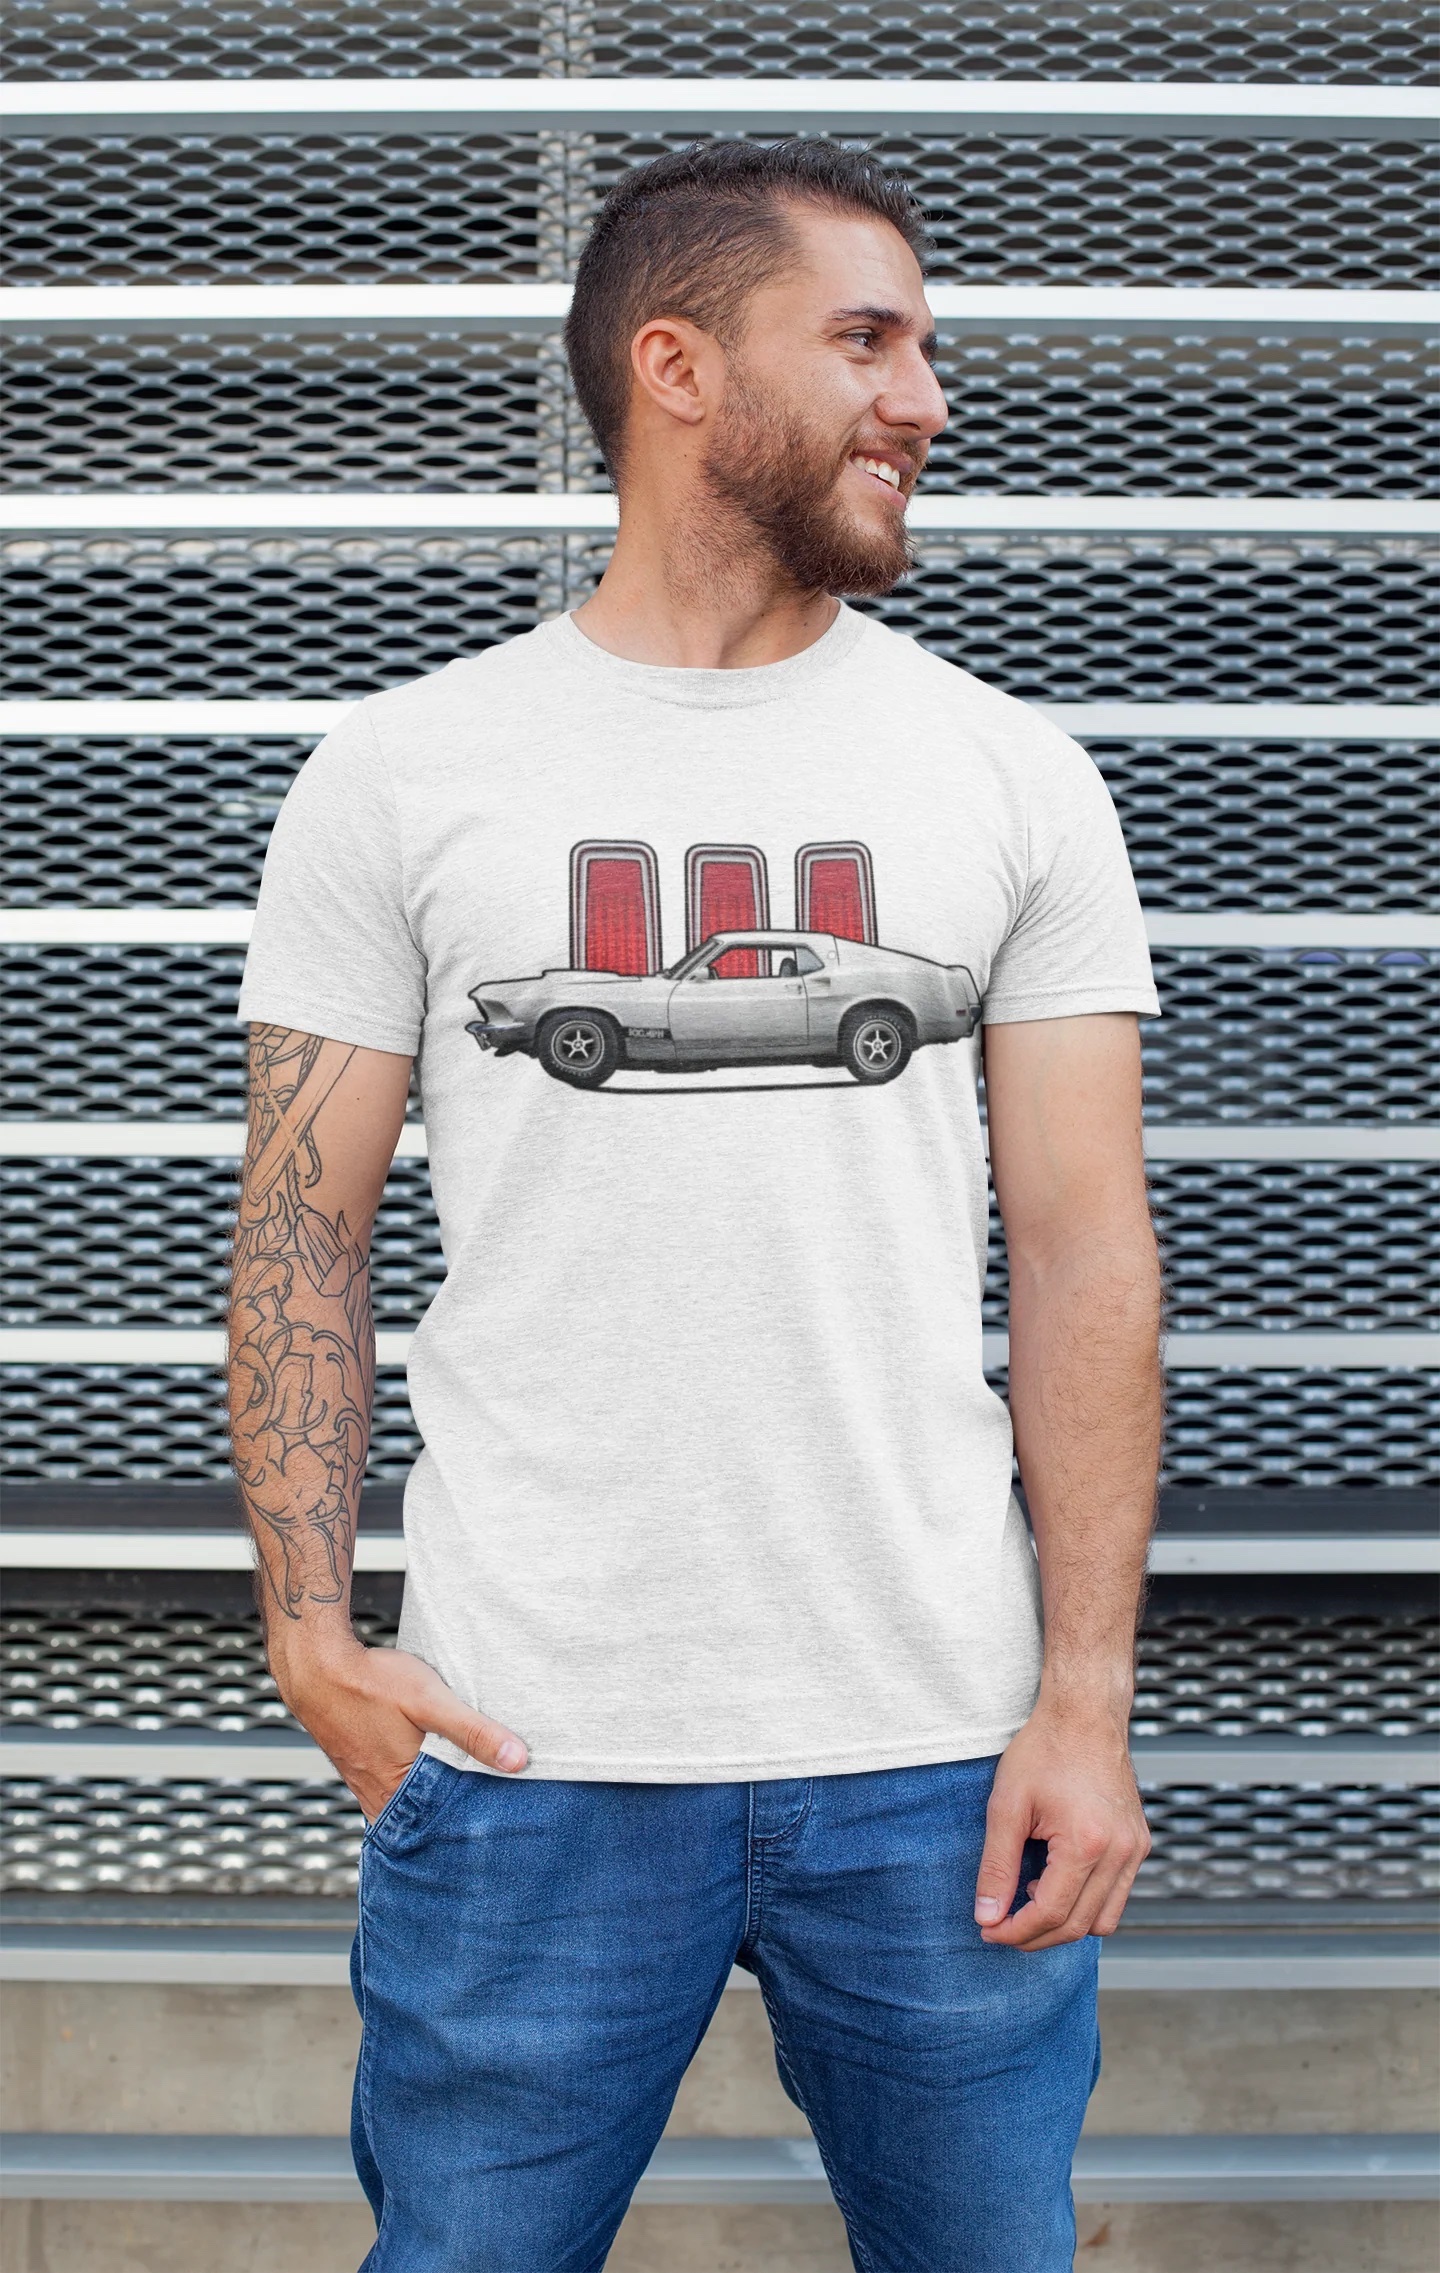 “Love The Taillights” Ford Mustang t-shirt